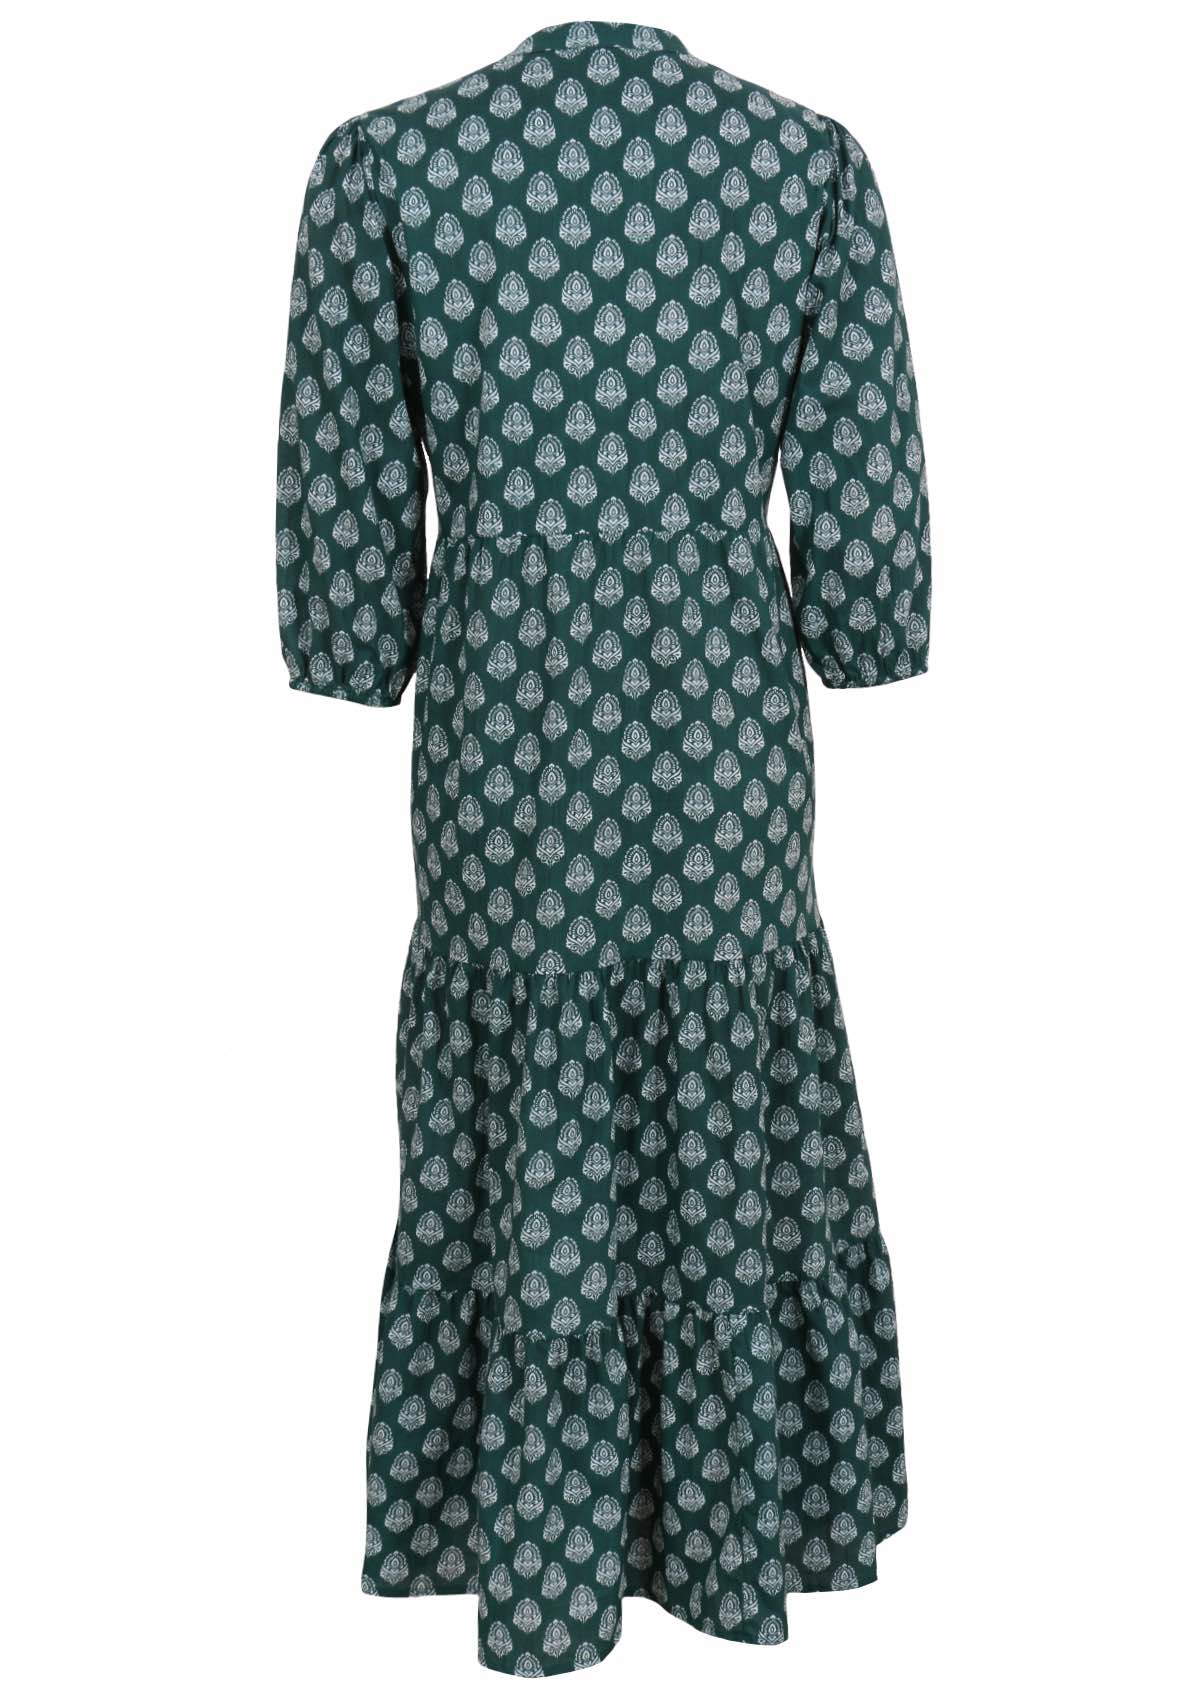 100% cotton relaxed fit tiered maxi dress with white pendant print on green base